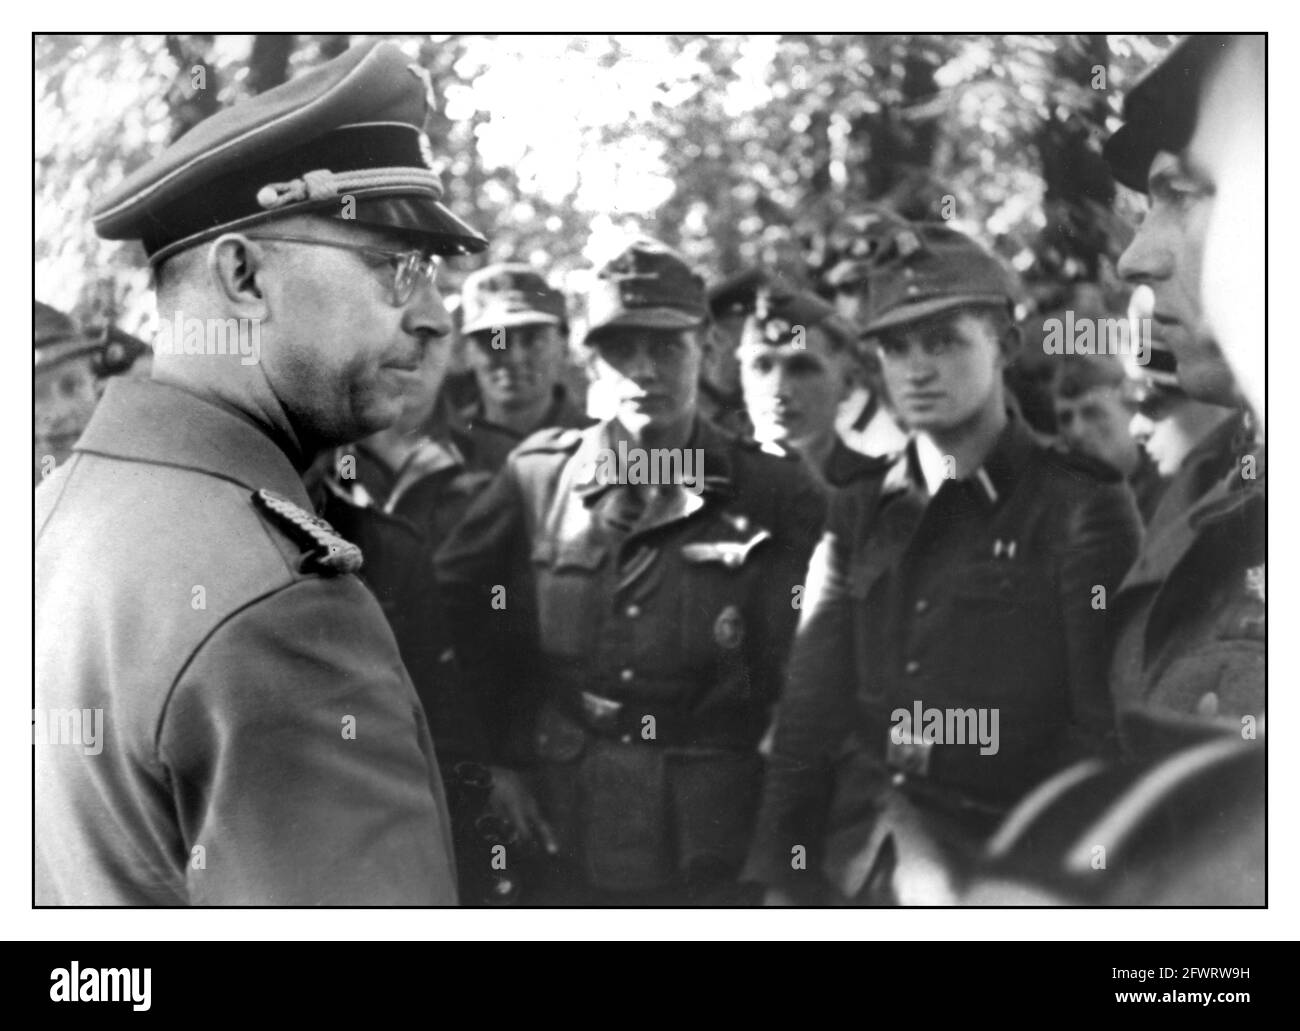 HIMMLER 1940's WW2 Heinrich Luitpold Himmler in conversation with soldiers of the Waffen SS  he was Reichsführer of the Schutzstaffel (Protection Squadron; SS), and a leading member of the Nazi Party (NSDAP) of Germany. Himmler was one of the most powerful men in Nazi Germany and a main architect of the Holocaust. Stock Photo